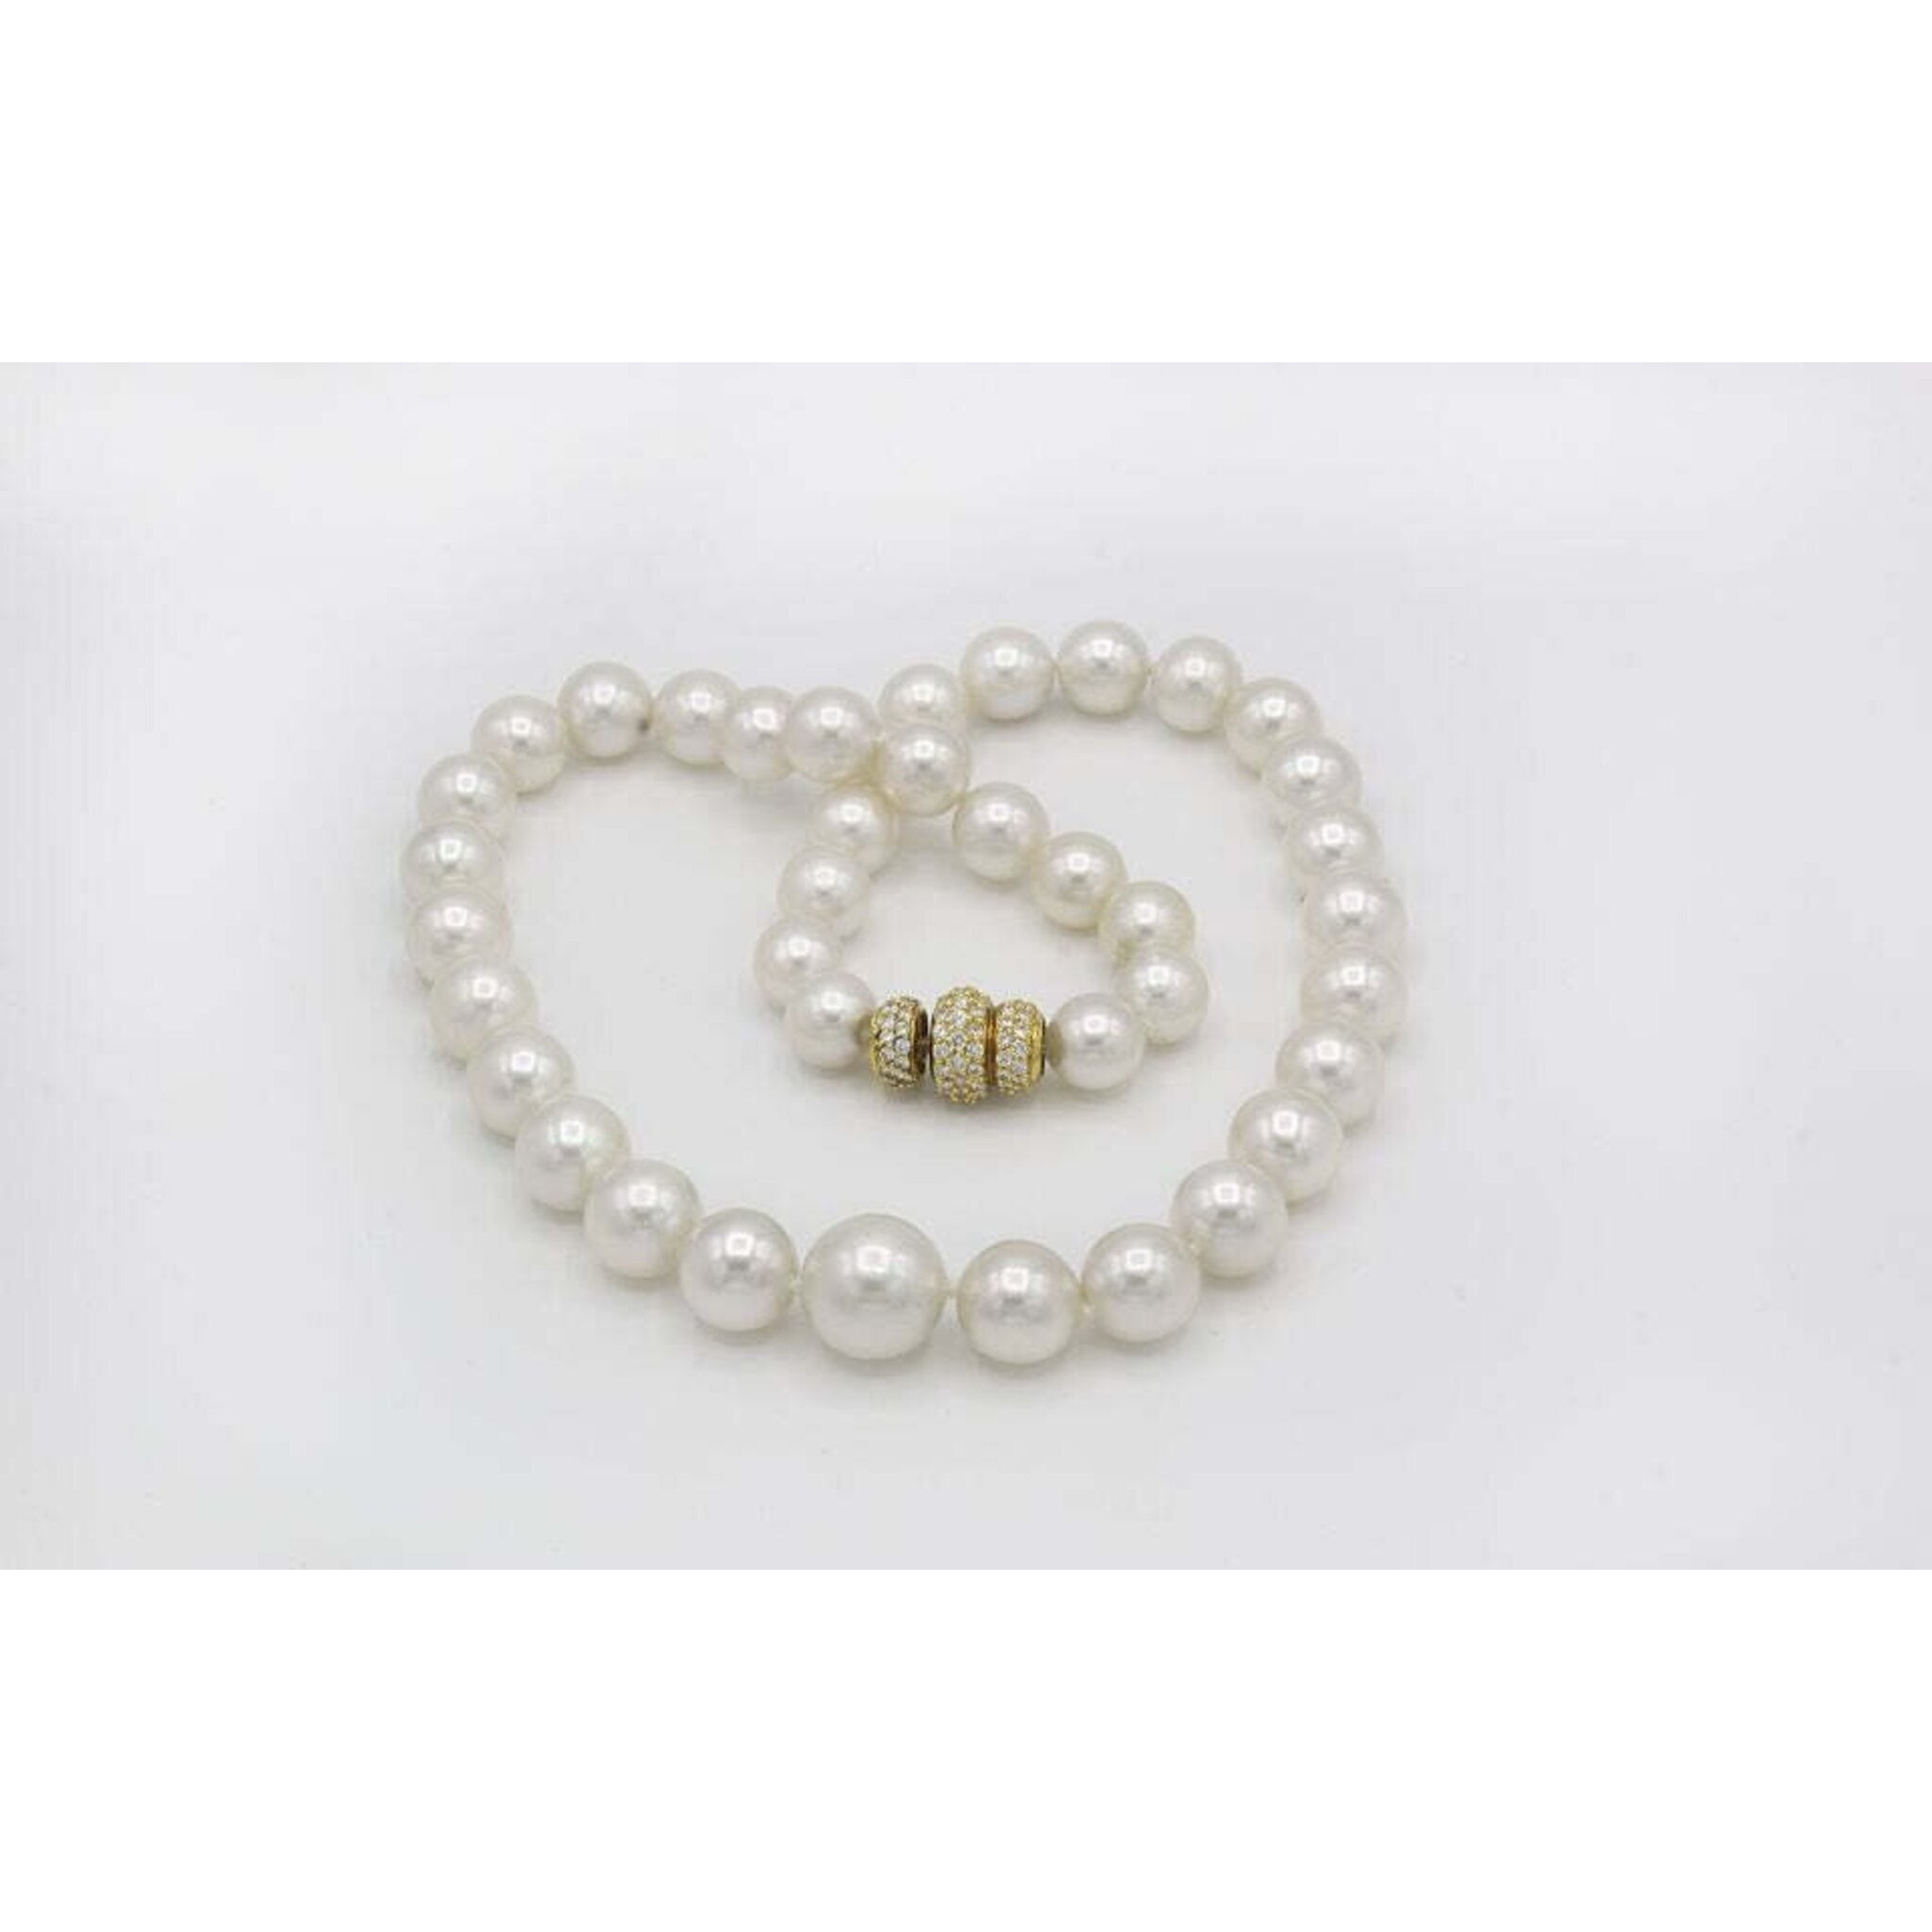 Simple pearl pendant necklace available in Silver, gold or rose gold –  Kathleen Barry Bespoke Occasion Accessories